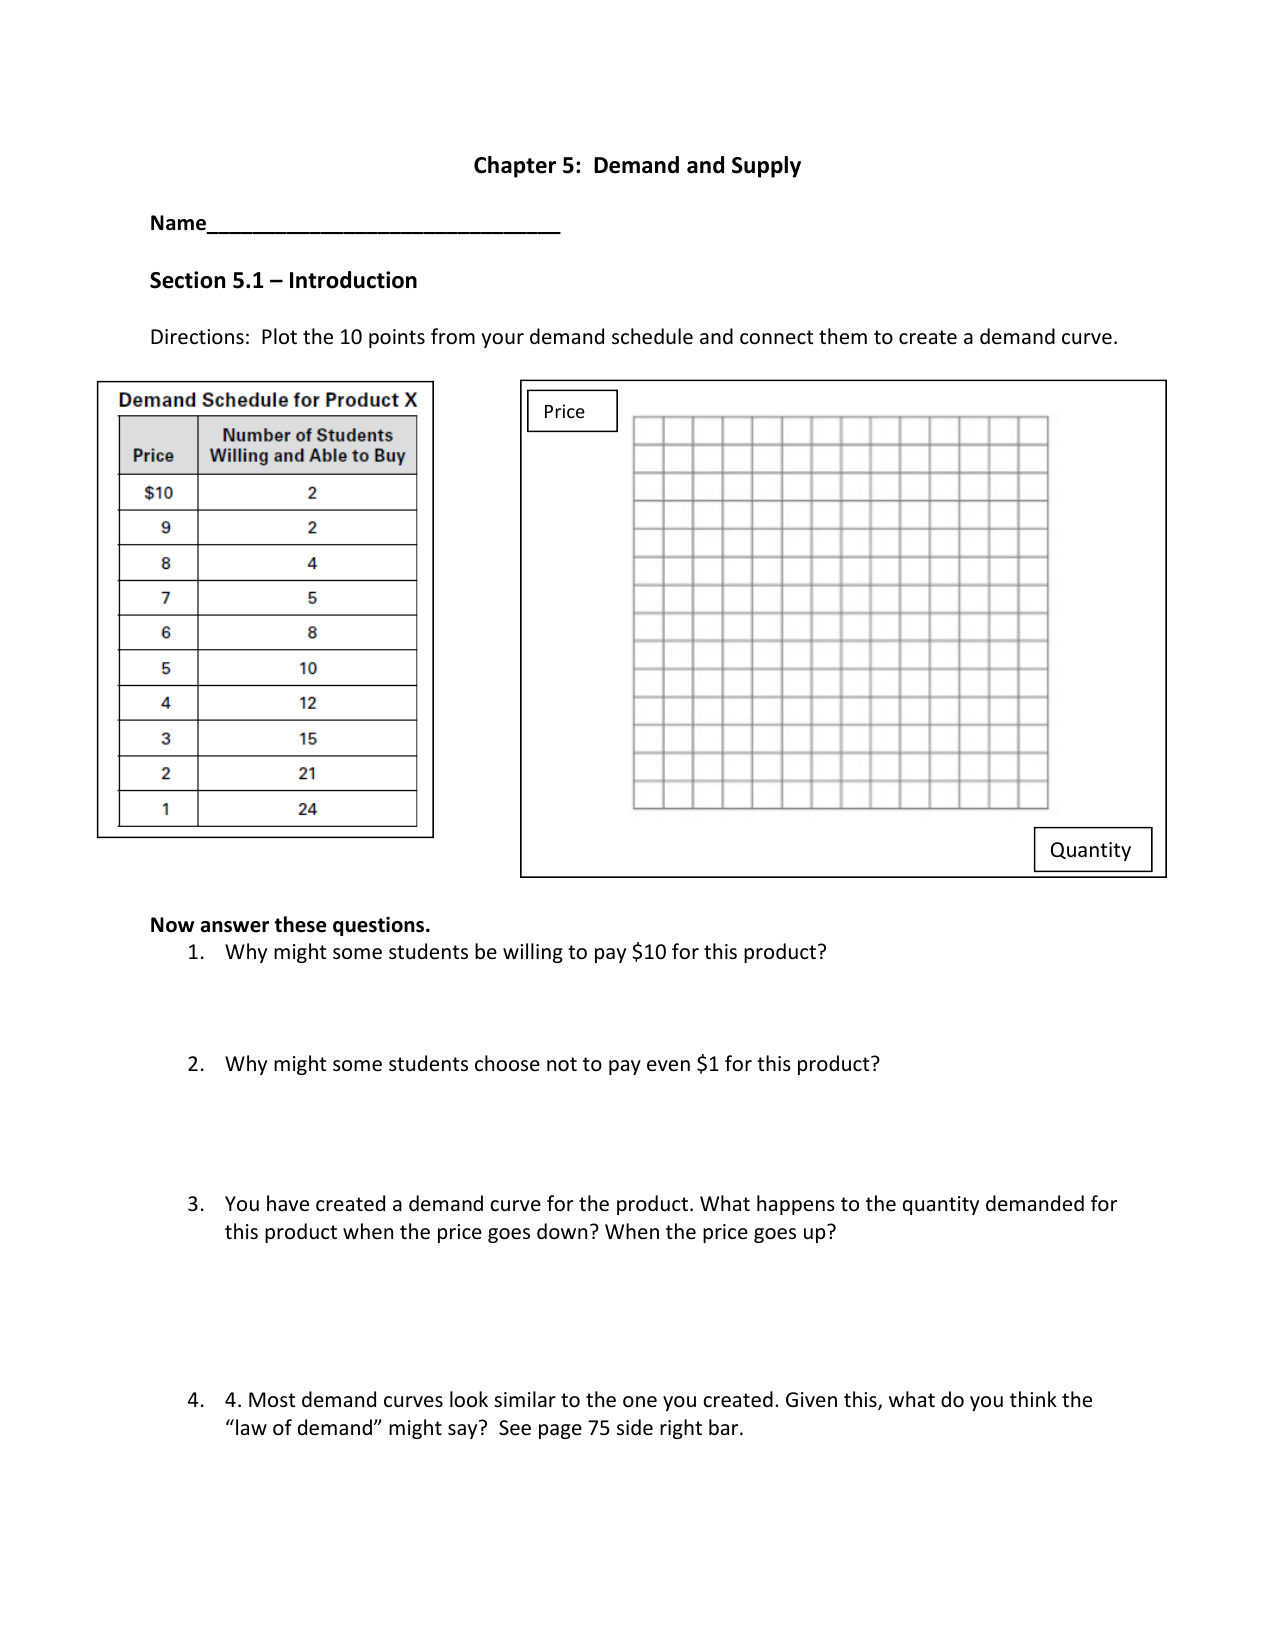 econ-supply-curve-worksheet-chapter-5-answers-promotiontablecovers